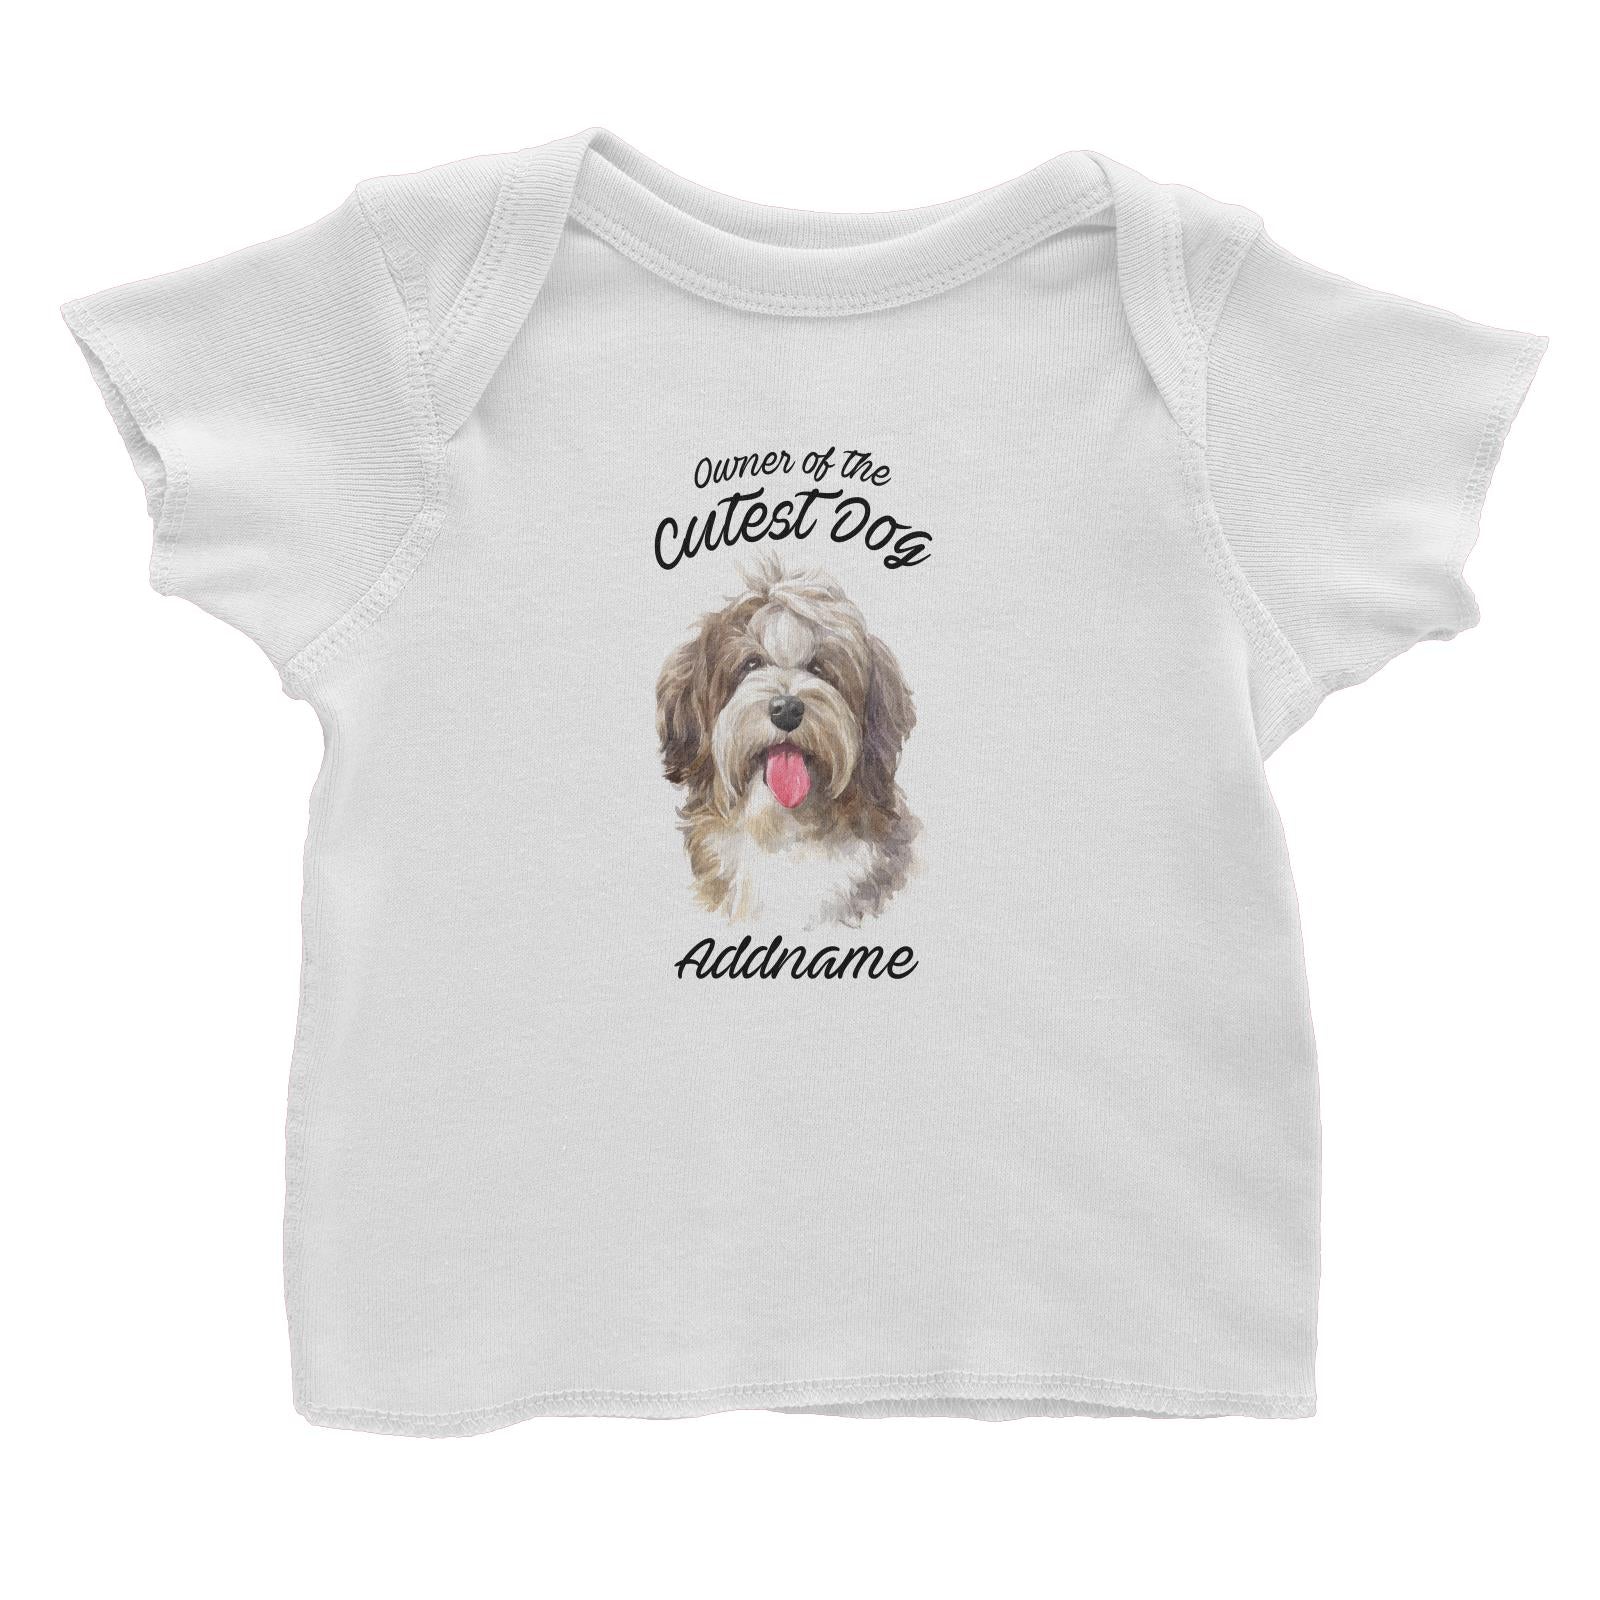 Watercolor Dog Owner Of The Cutest Dog Shaggy Havanese Addname Baby T-Shirt